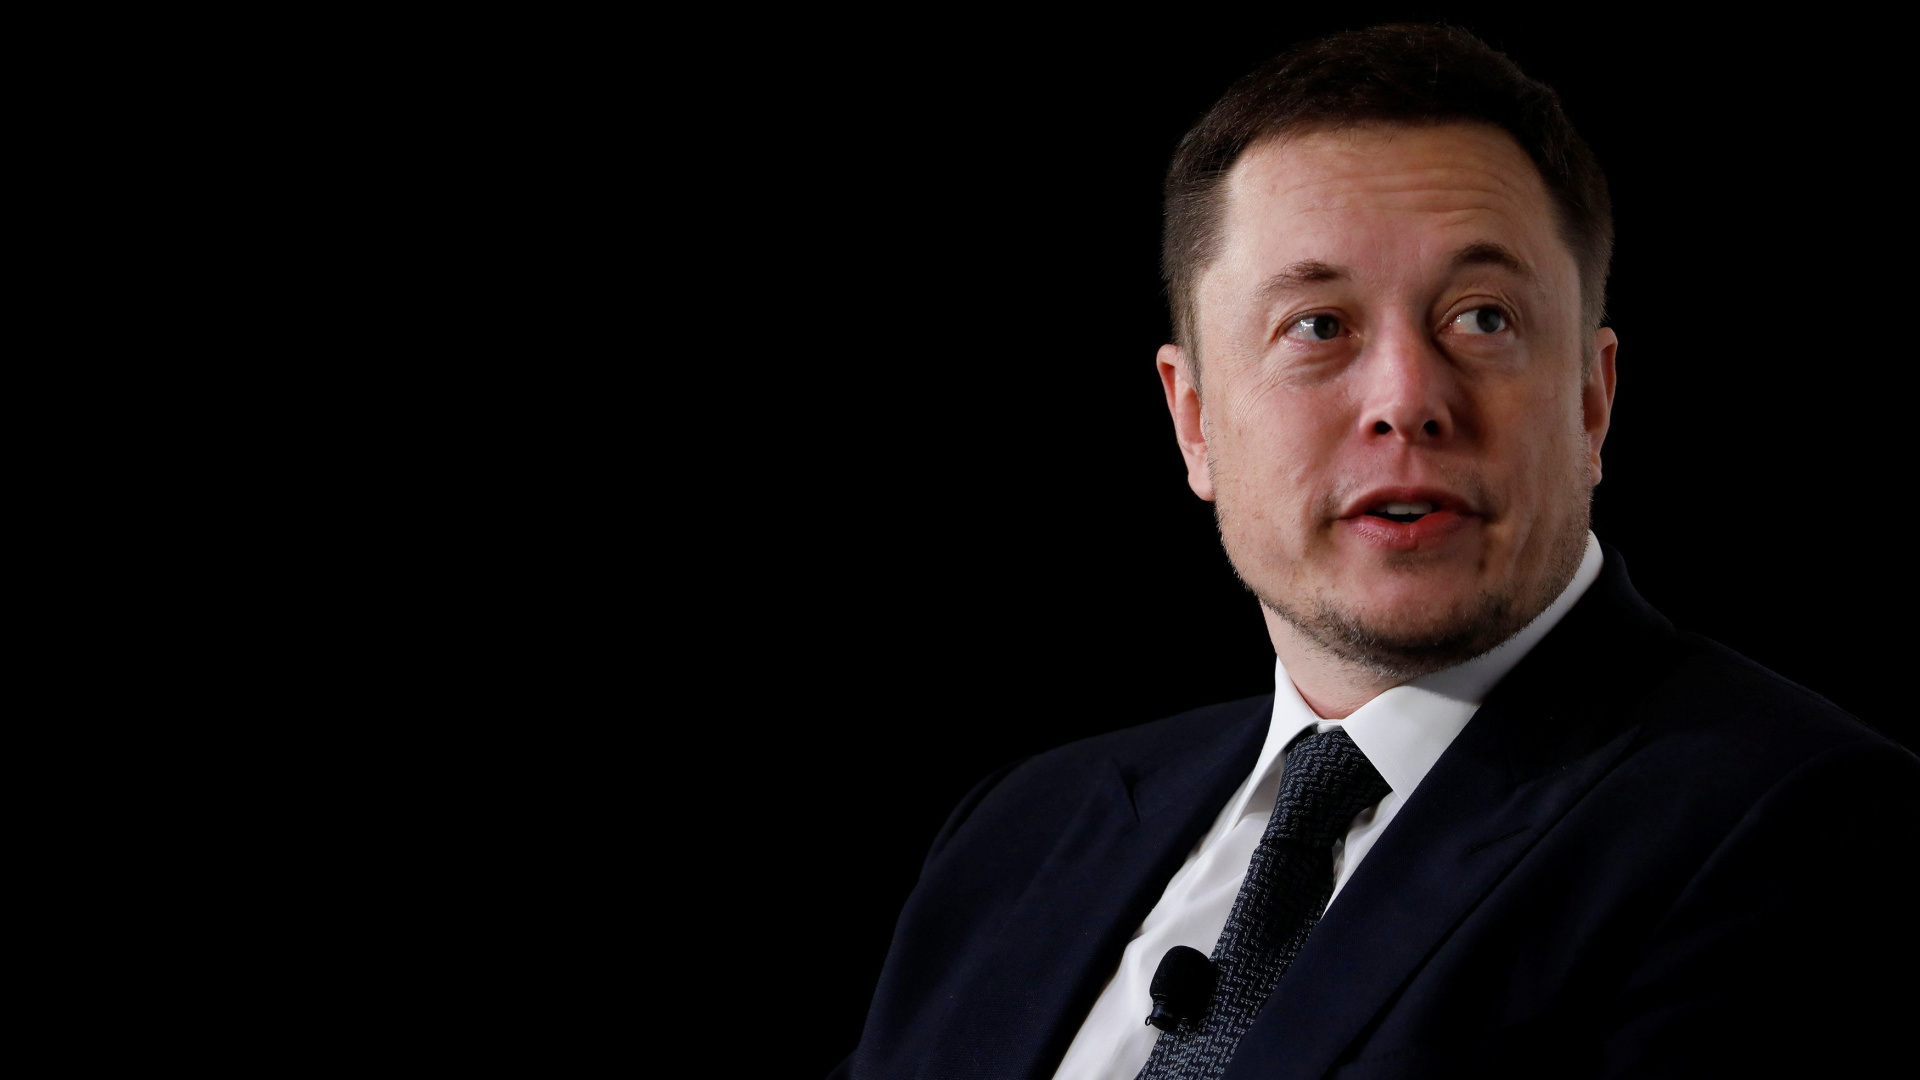 Elon Musk Full HD, HDTV, 1080p 16:9 Wallpapers, HD Elon Musk 1920x1080  Backgrounds, Free Images Download